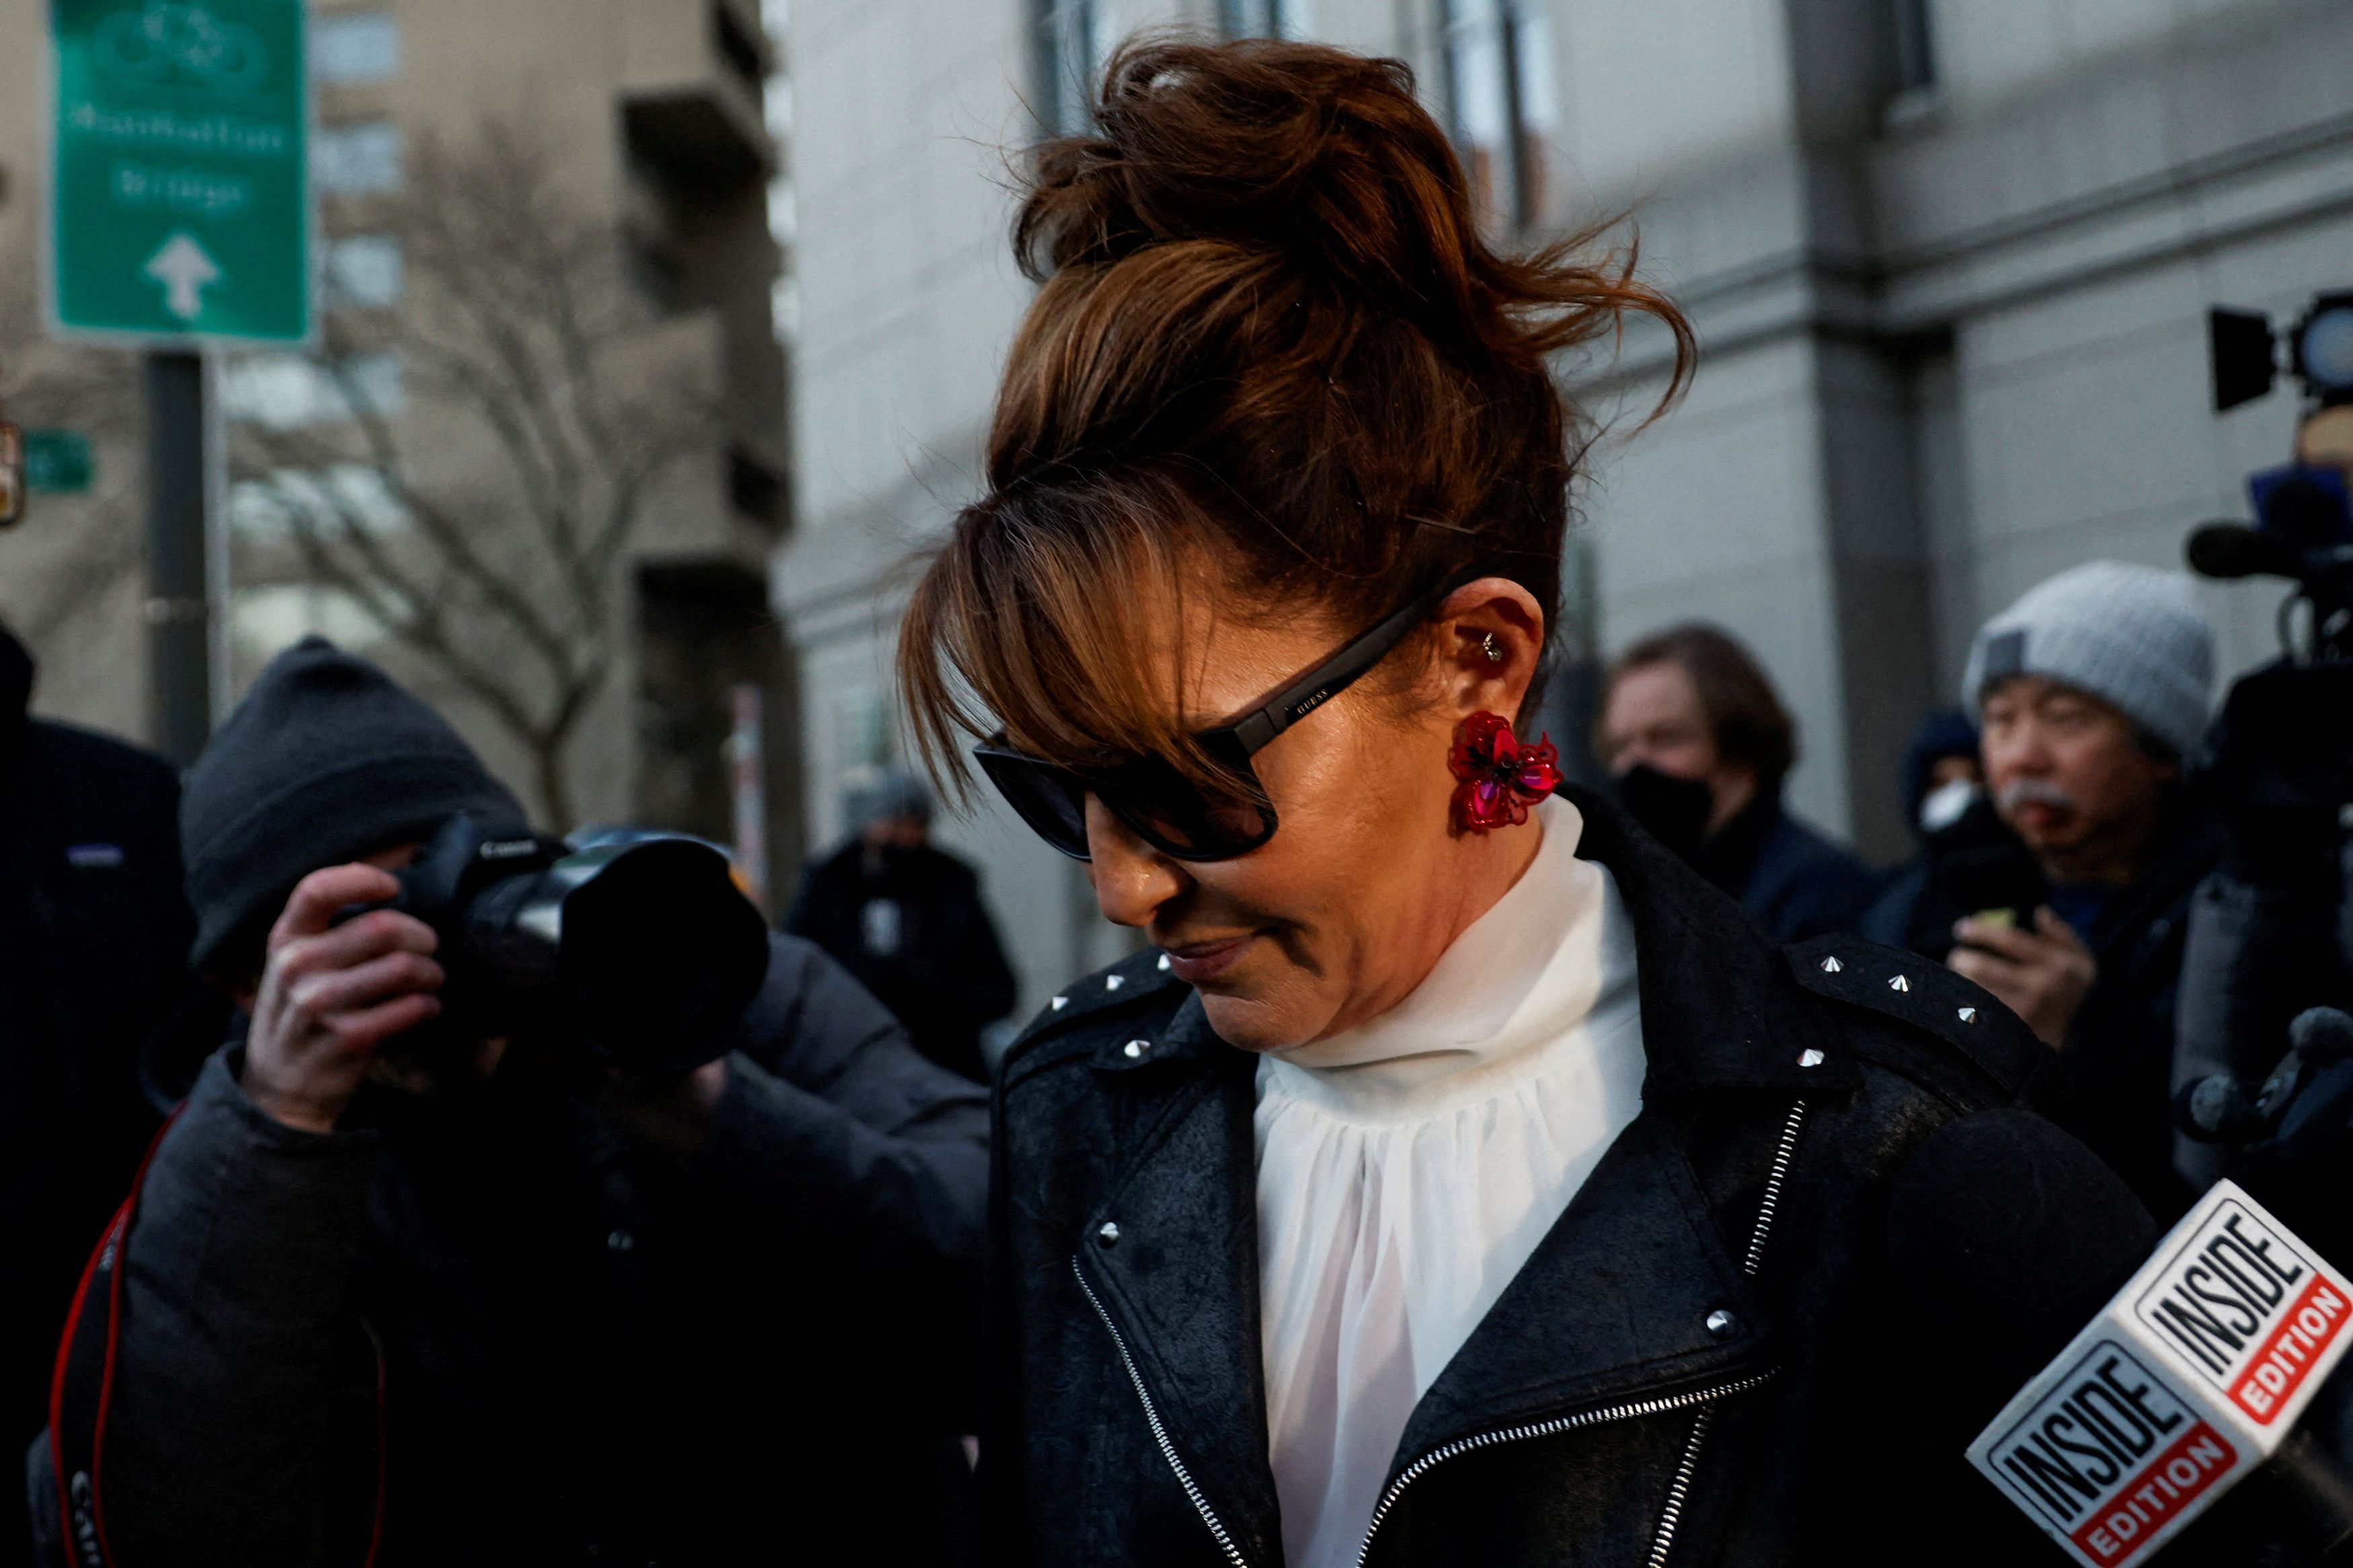 Sarah Palin, 2008 Republican vice presidential candidate and former Alaska governor, exits the United States Courthouse in New York